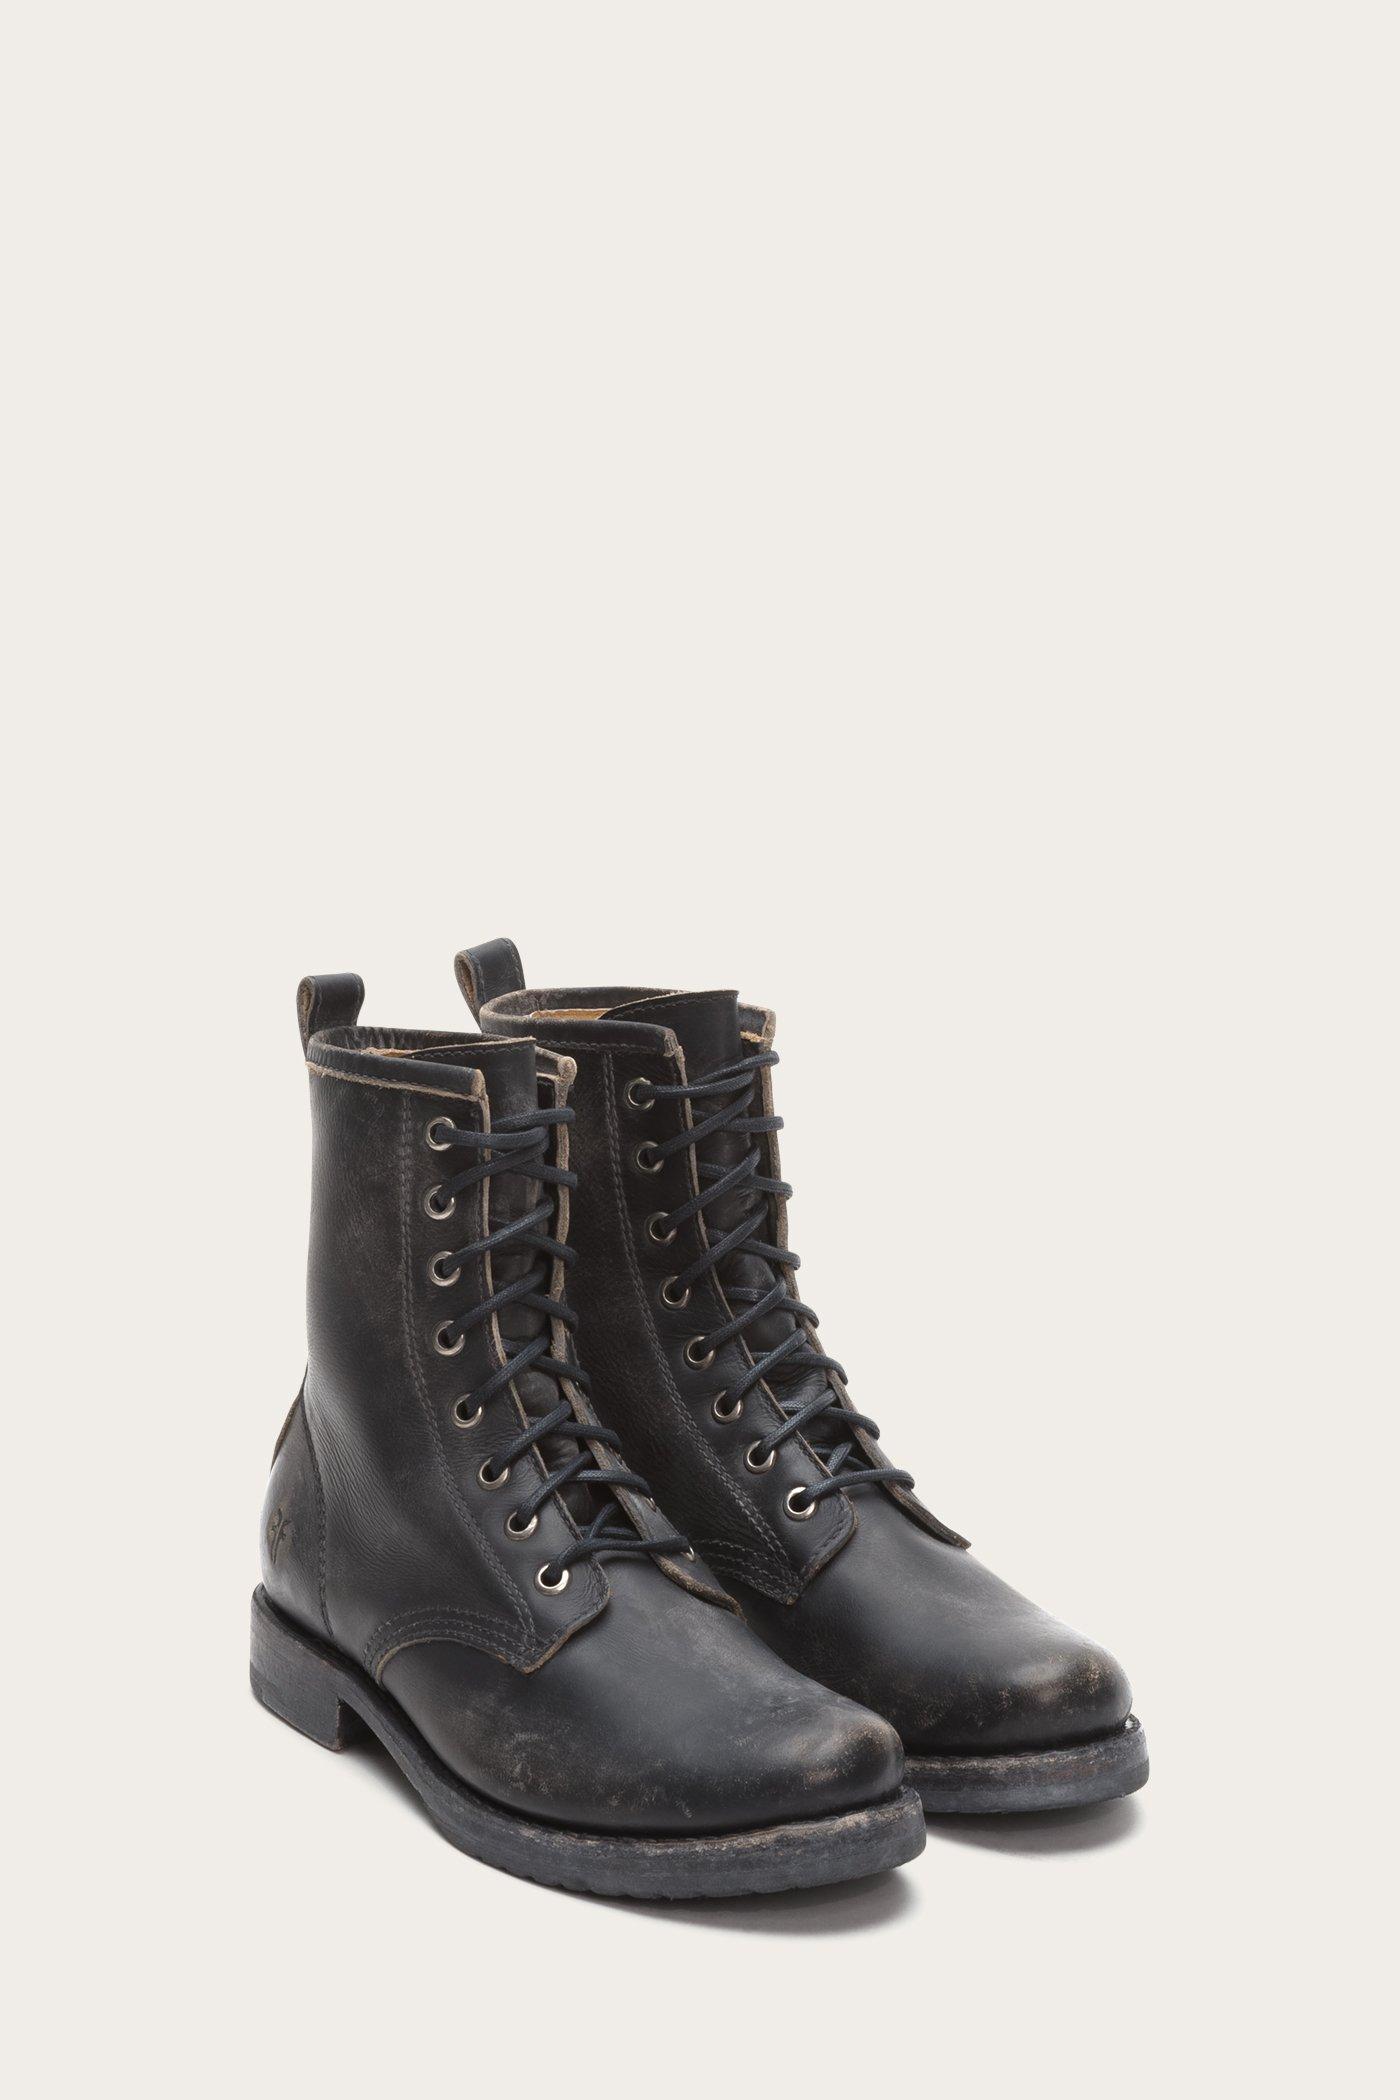 Frye Leather Veronica Combat in Black - Lyst